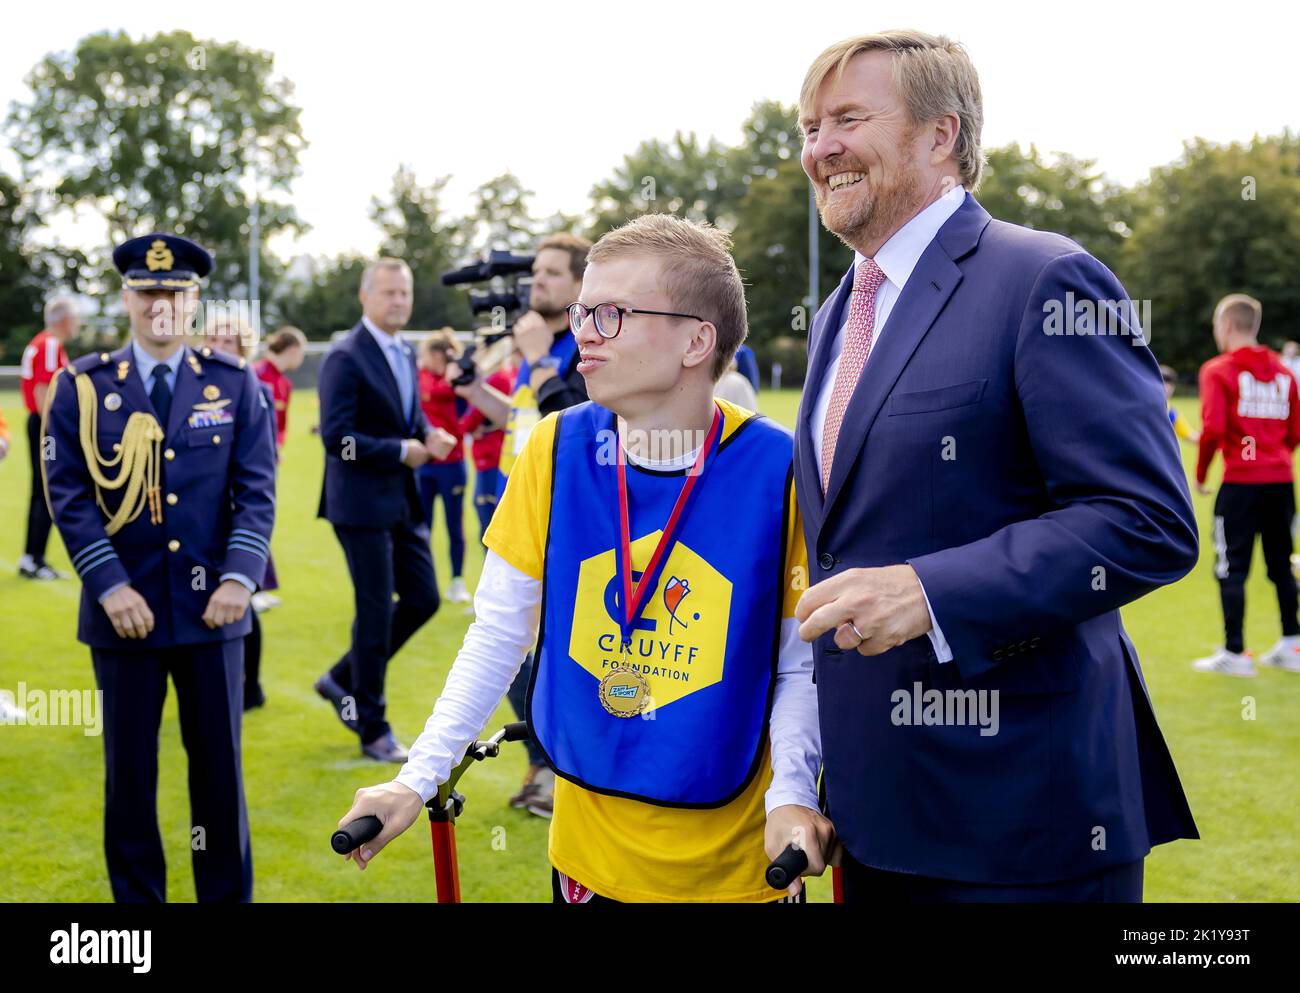 2022-09-21 13:33:23 AMSTERDAM - King Willem-Alexander visits the Cruyff Foundation Open Day at Sports Complex De Toekomst. The king toured the sports field and spoke with children, sports providers and ambassadors. ANP ROBIN VAN LONKHUIJSEN netherlands out - belgium out Stock Photo